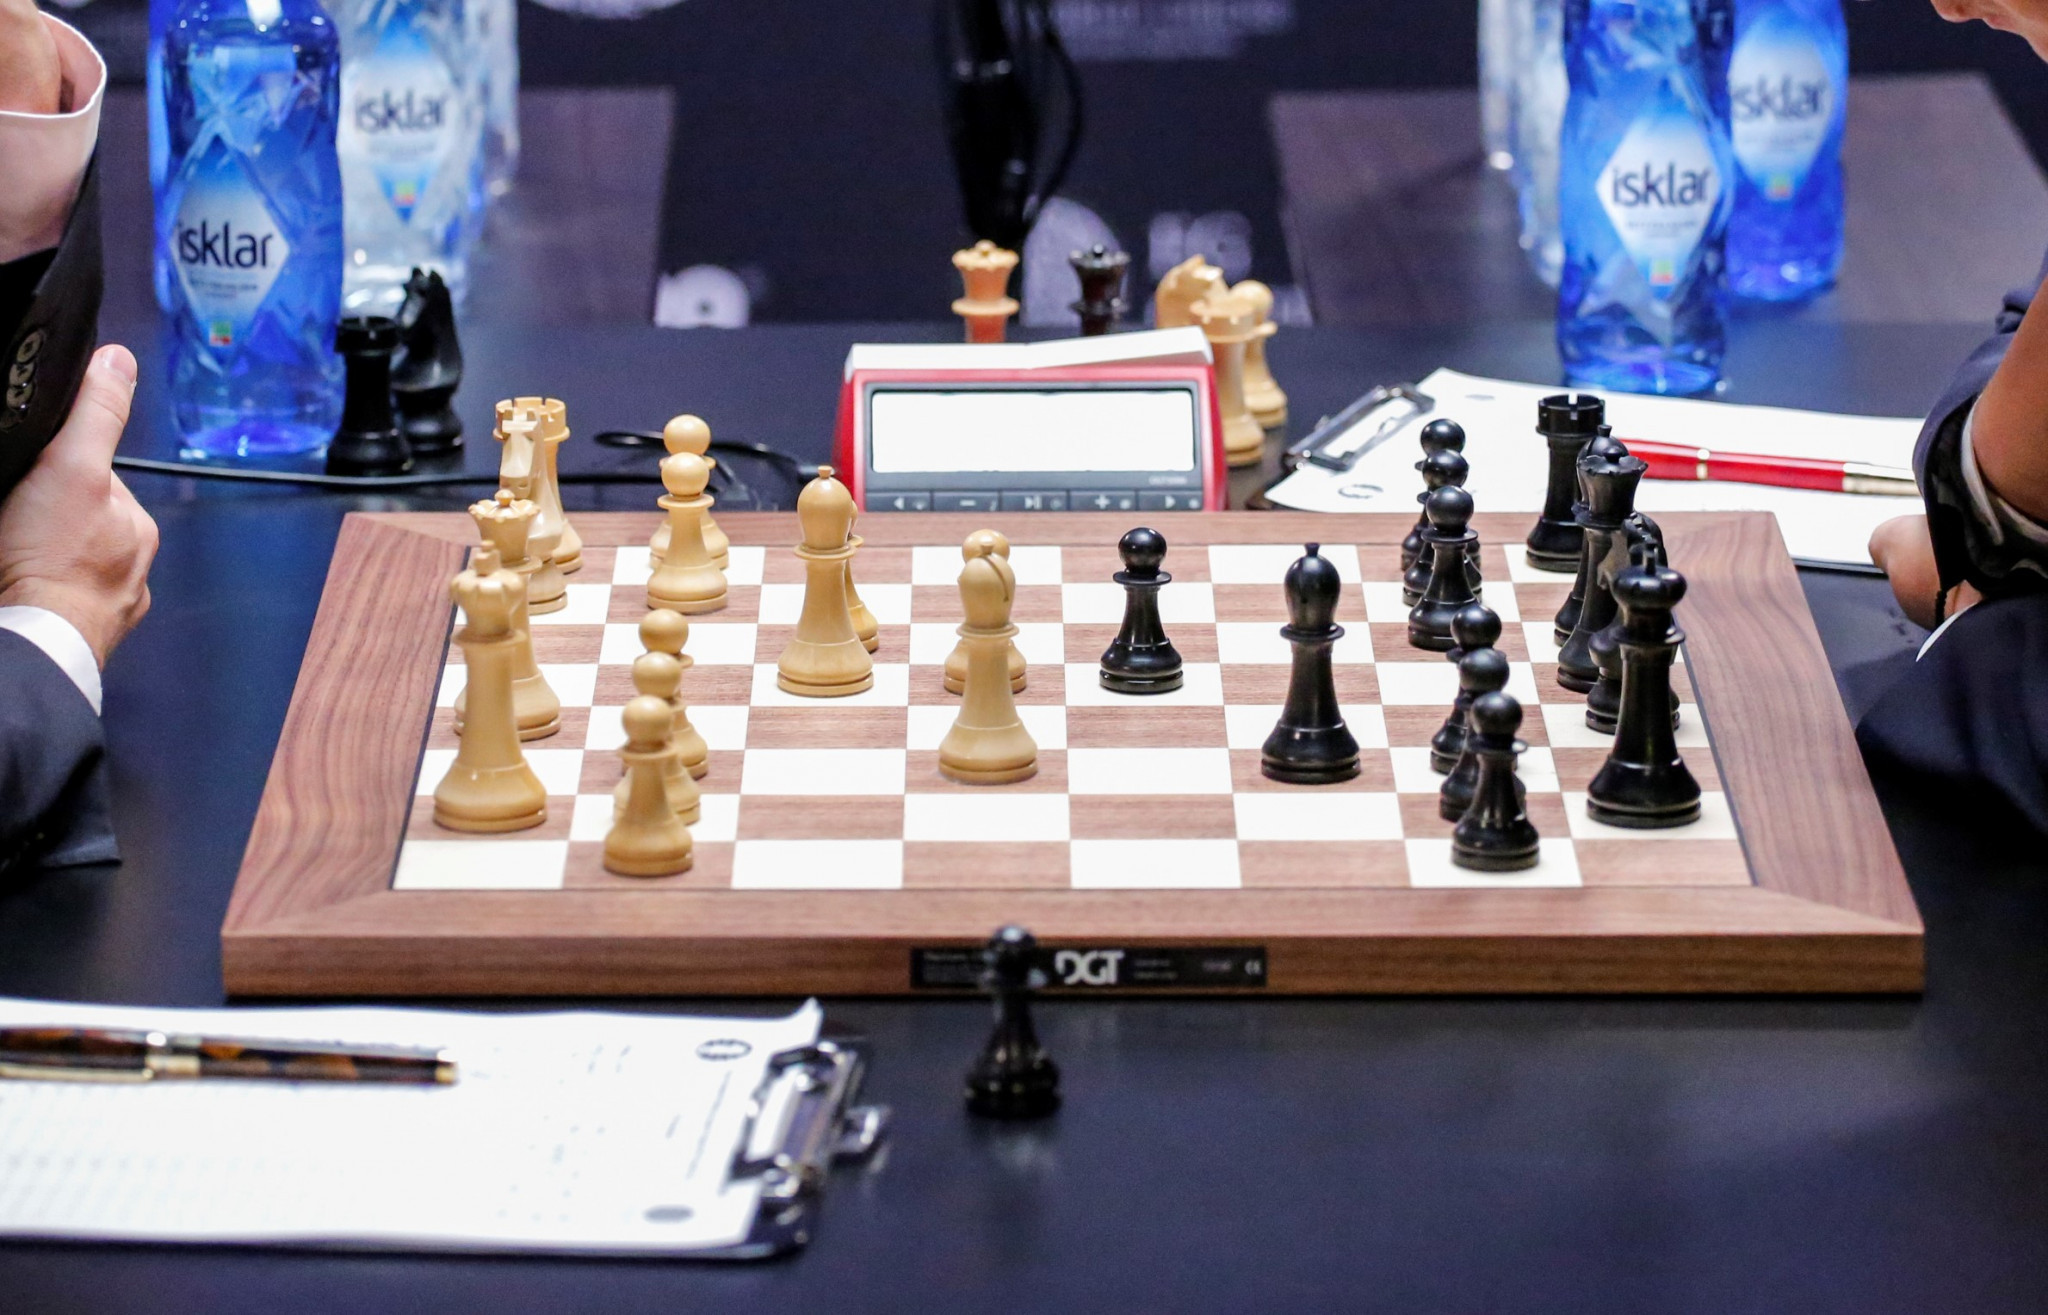 Three-way tie for lead after fifth round of matches at European Individual Chess Championship